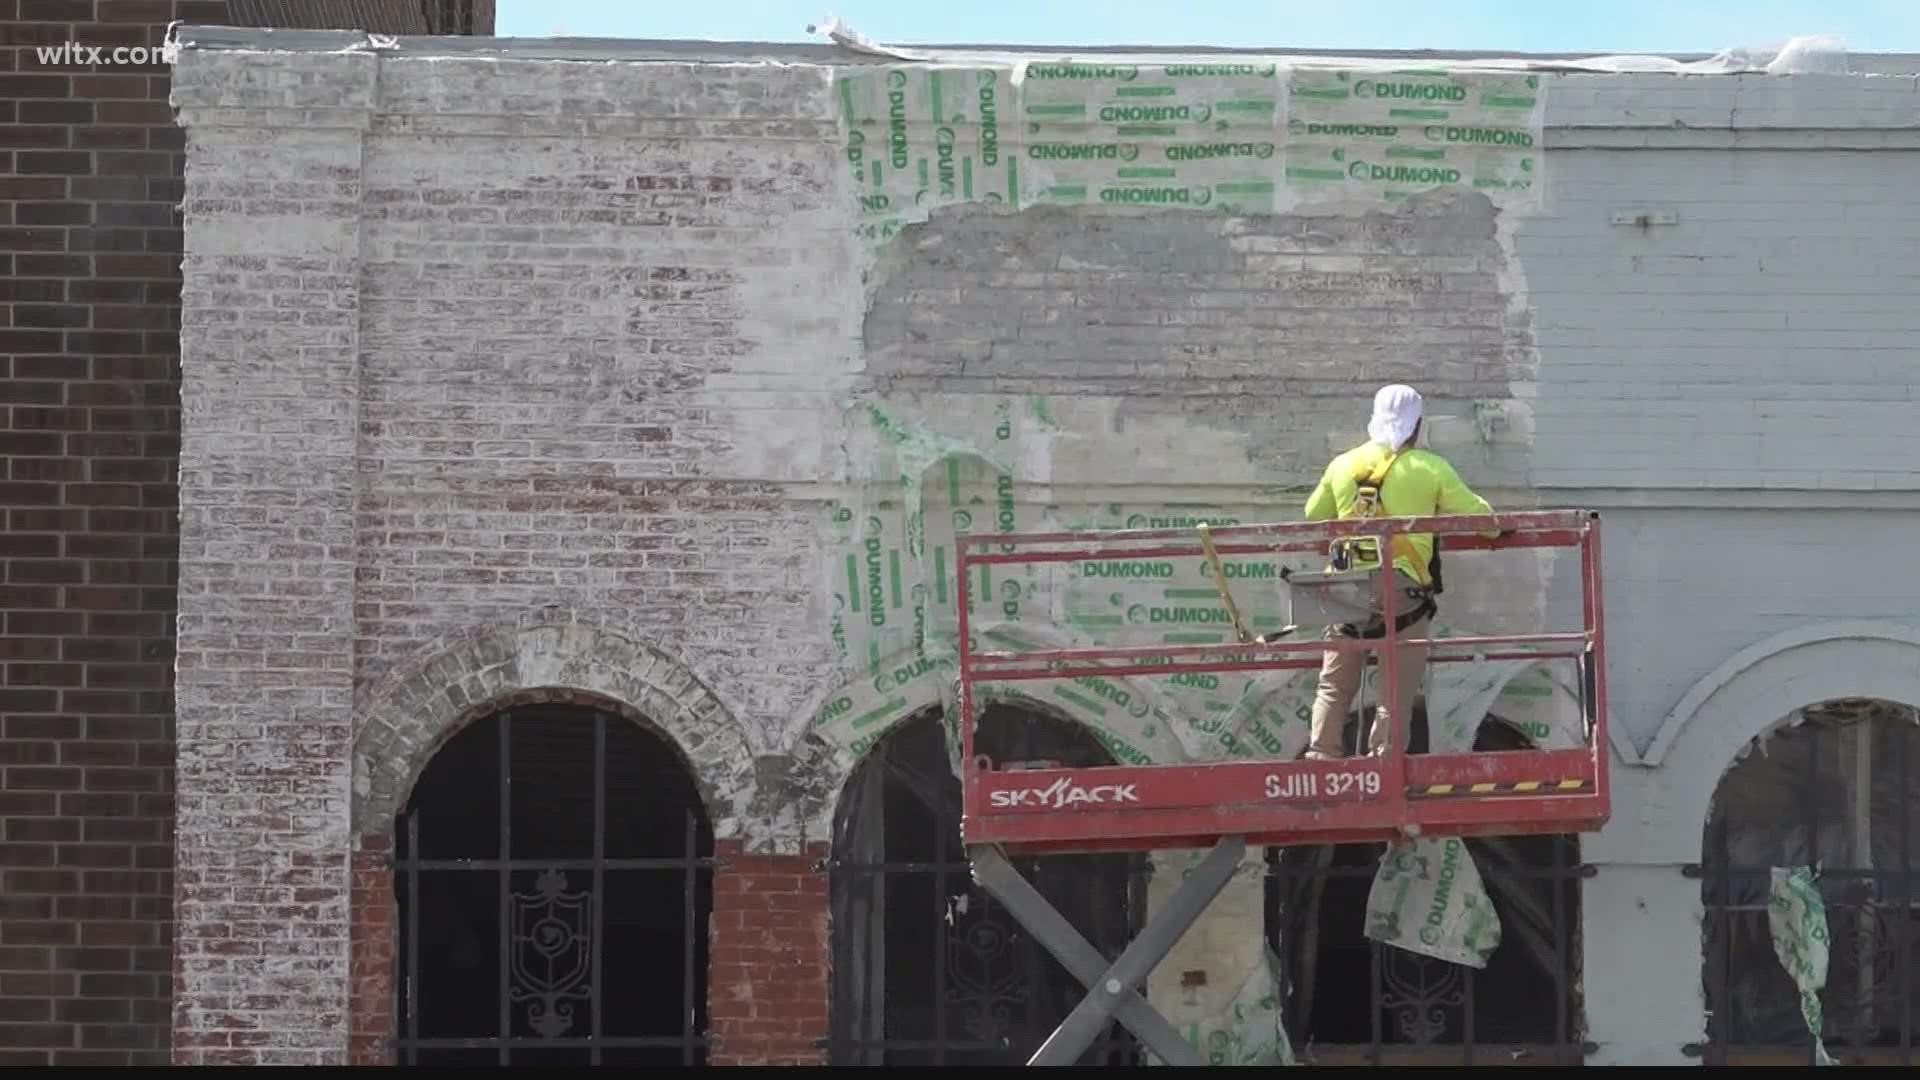 Several buildings in downtown Camden are being renovated bringing new life to the area.